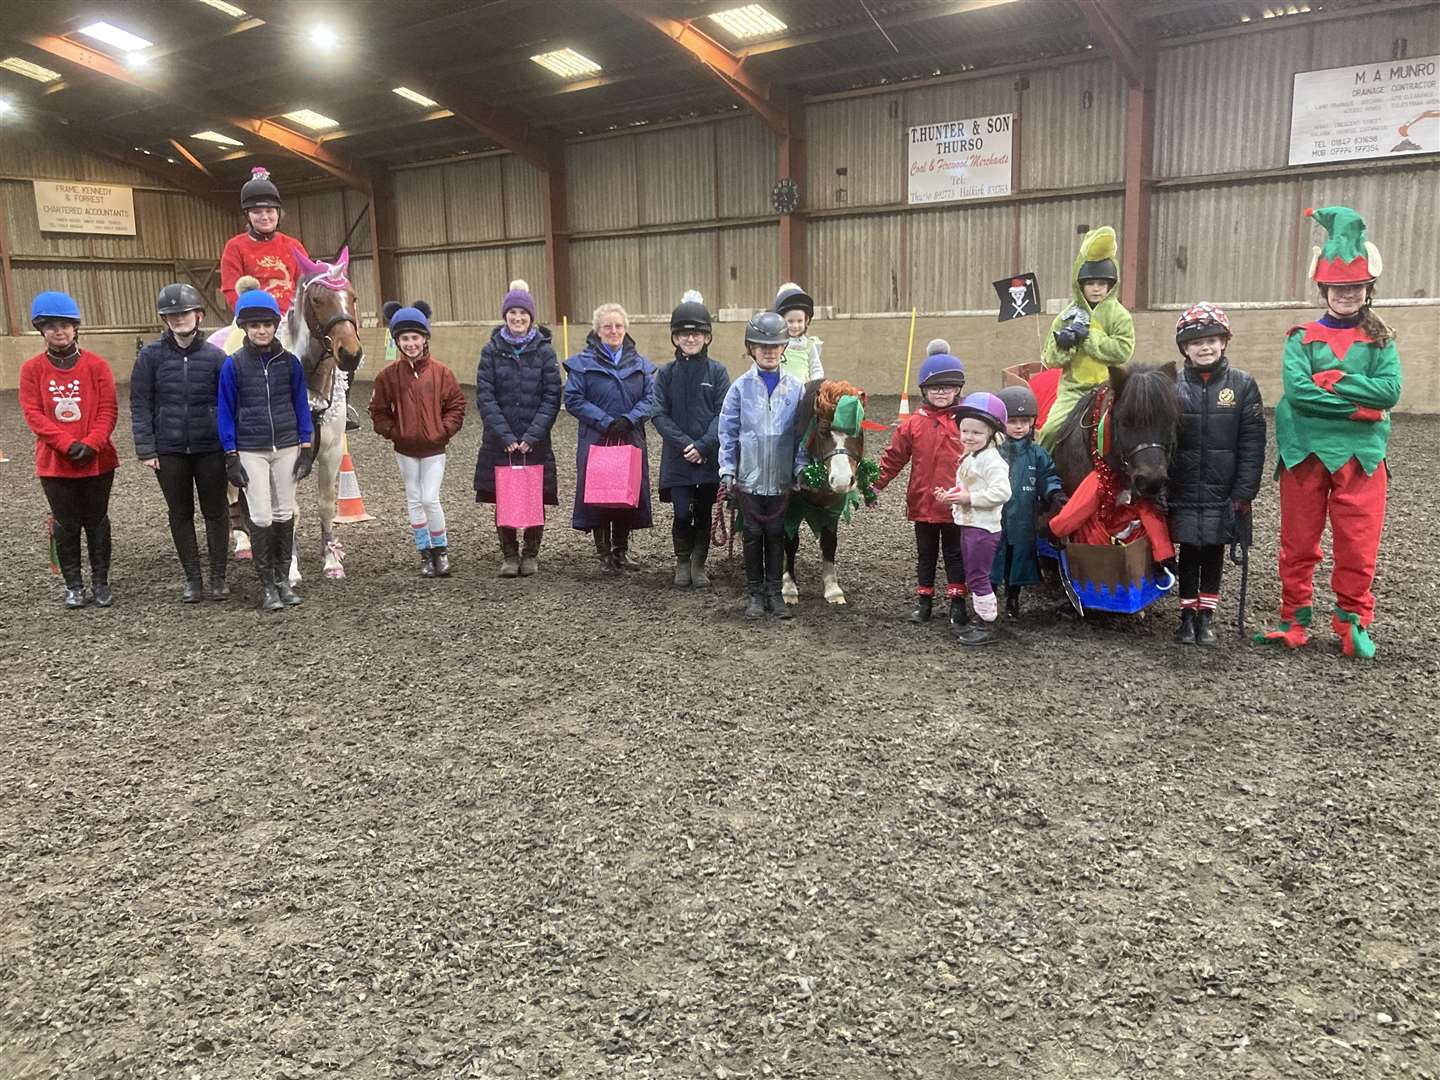 Caithness Pony Club with committee Mary Elder and Frances Sutherland who are stepping down.